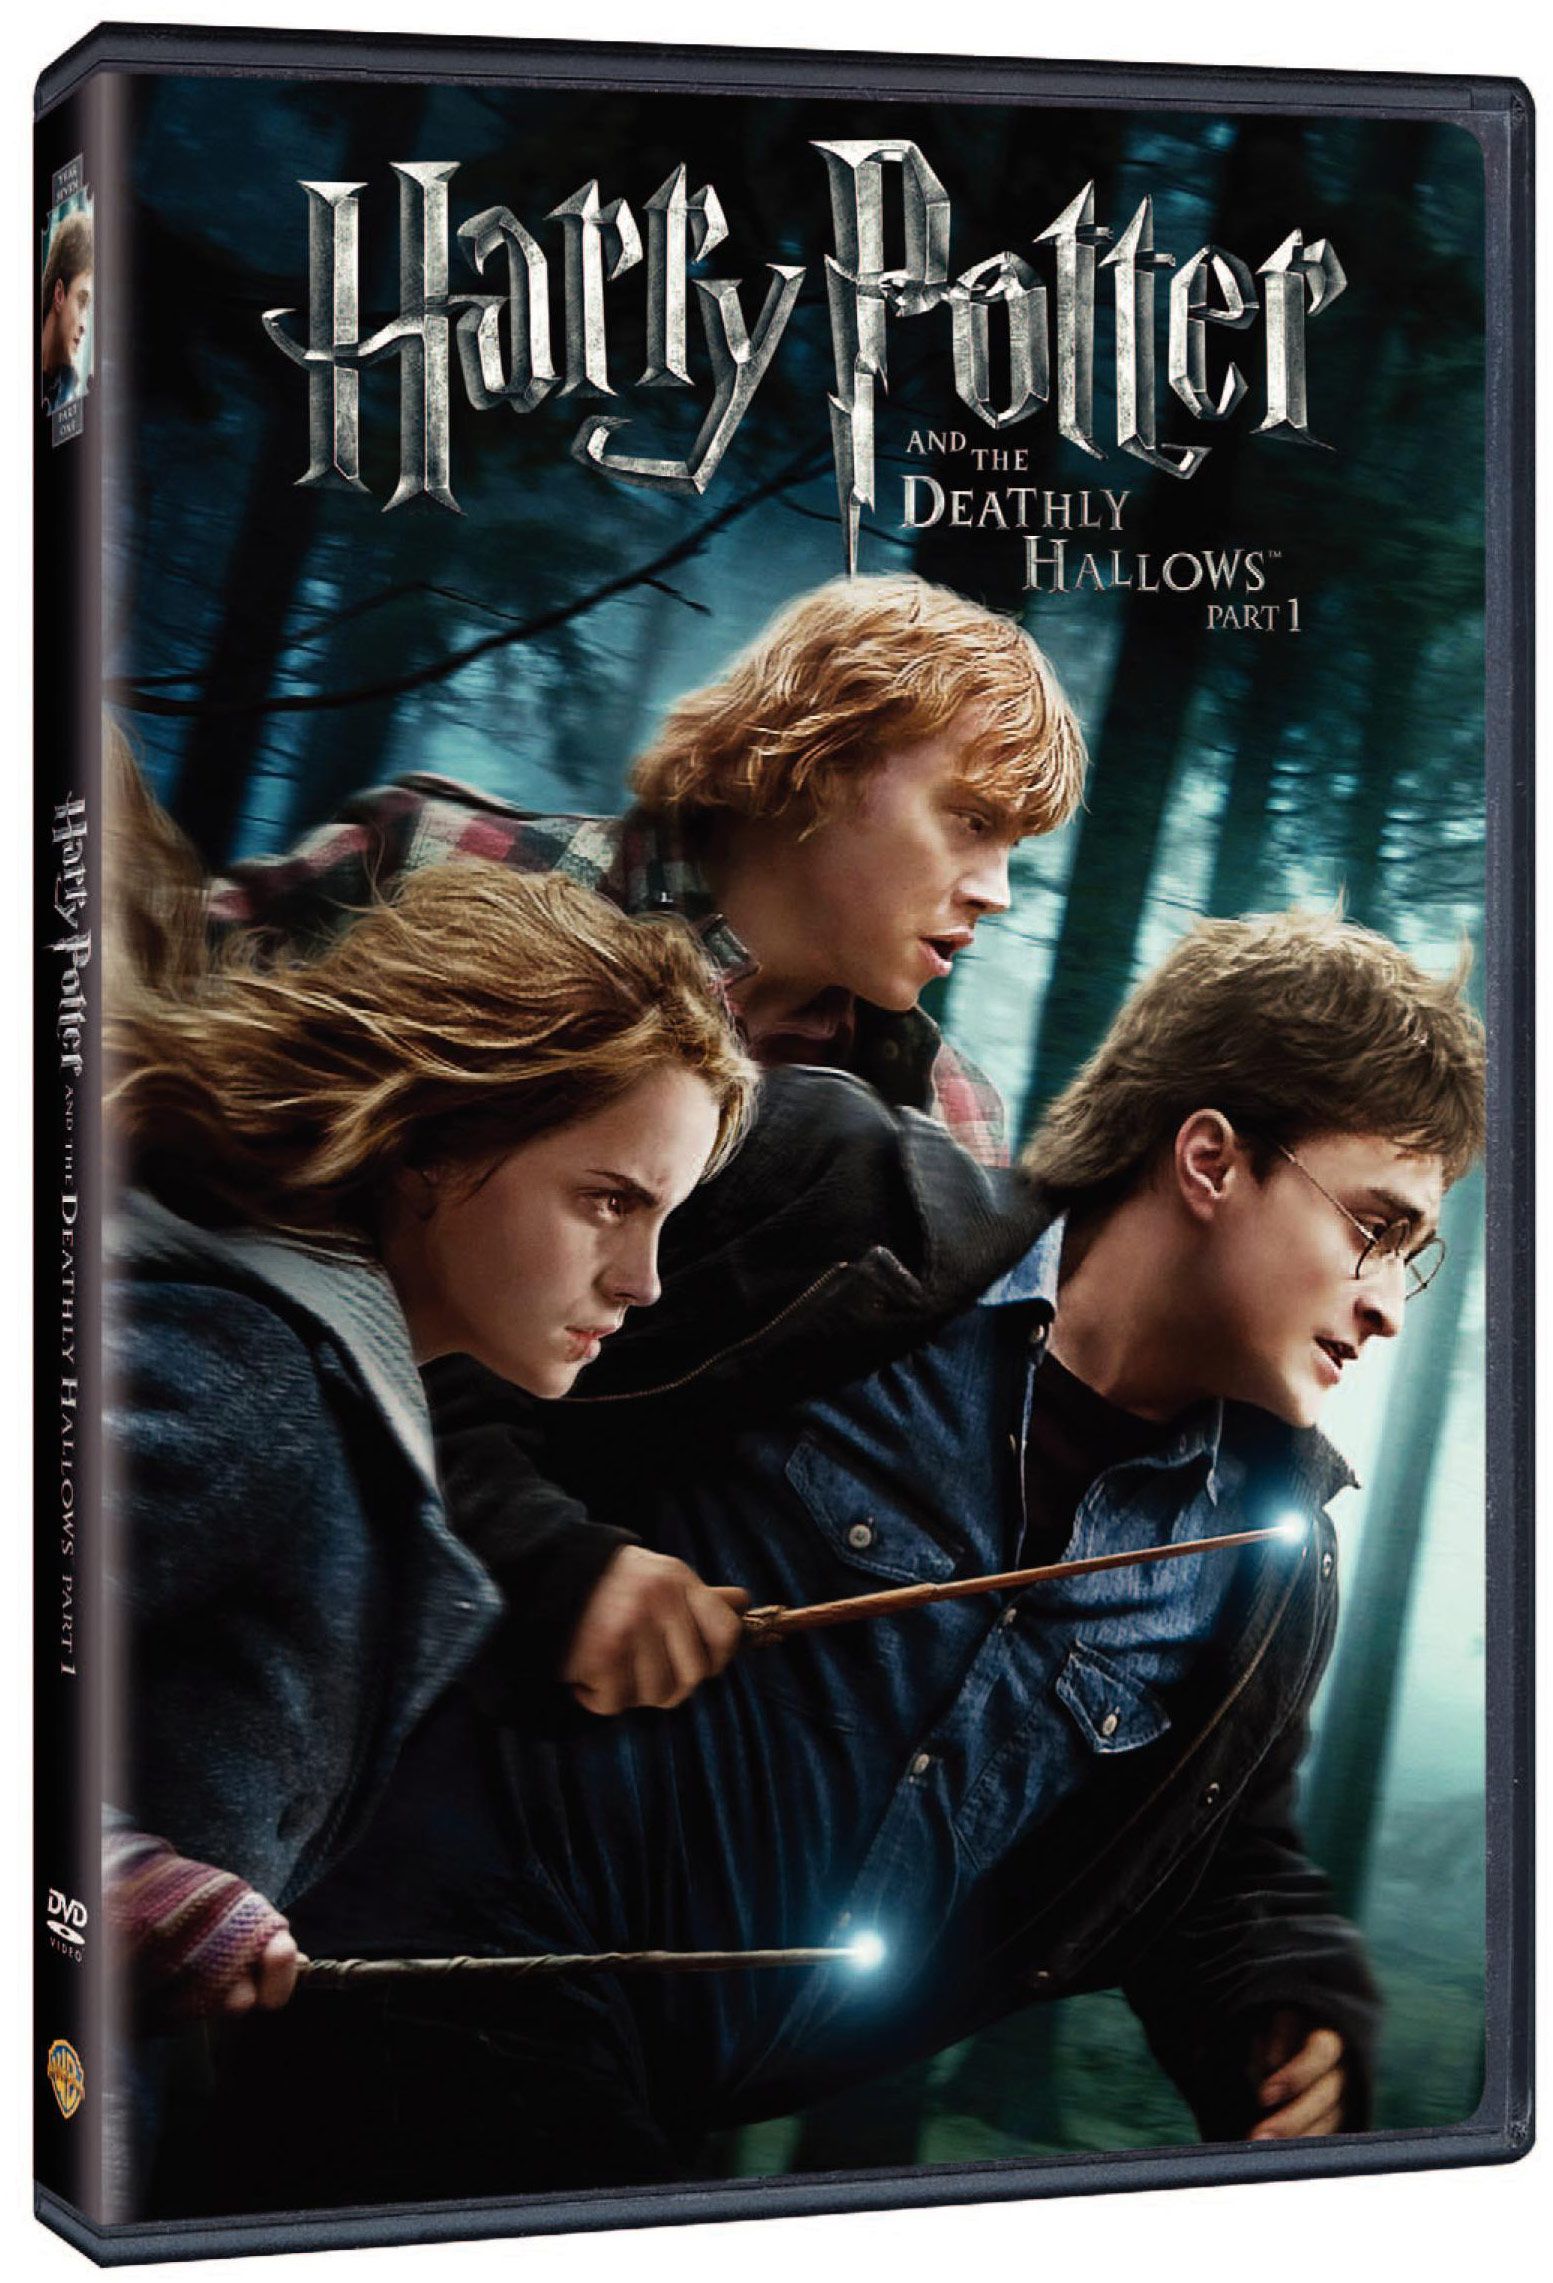 Harry Potter and the Deathly Hallows - Part 1 DVD Art